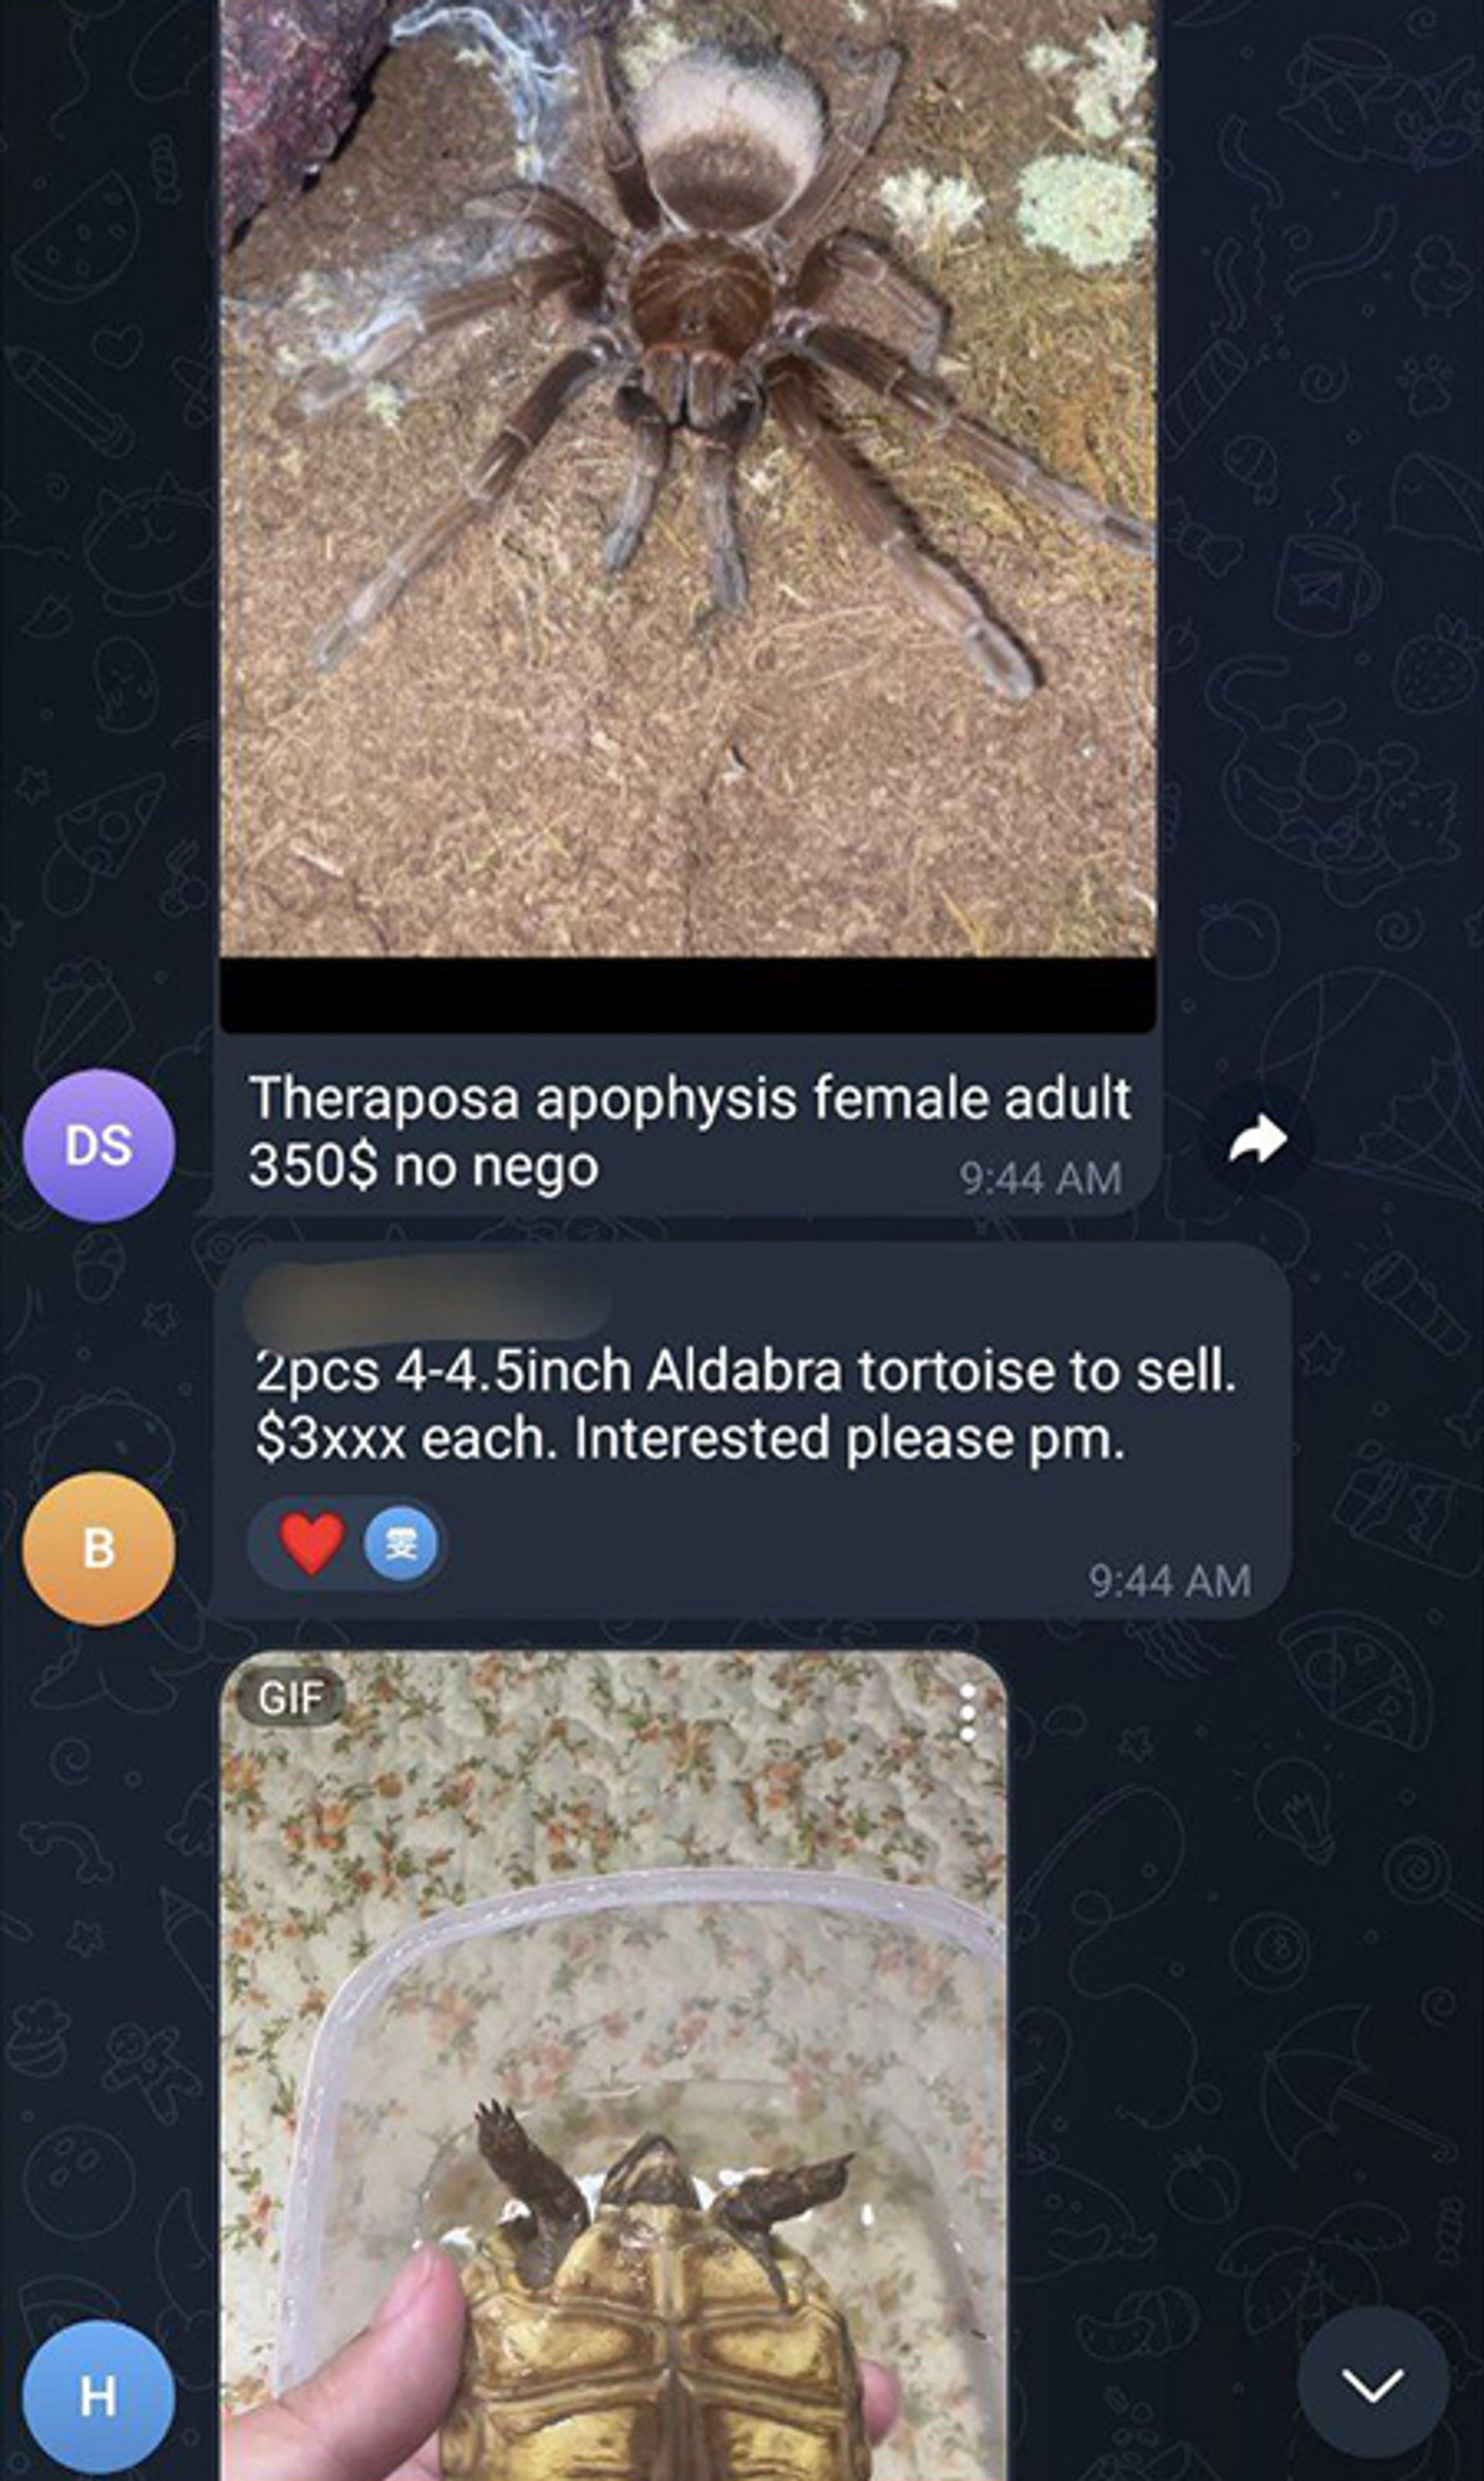 An Aldabra tortoise touted for sale on a Telegram group. PHOTO: SCREENGRAB FROM TELEGRAM